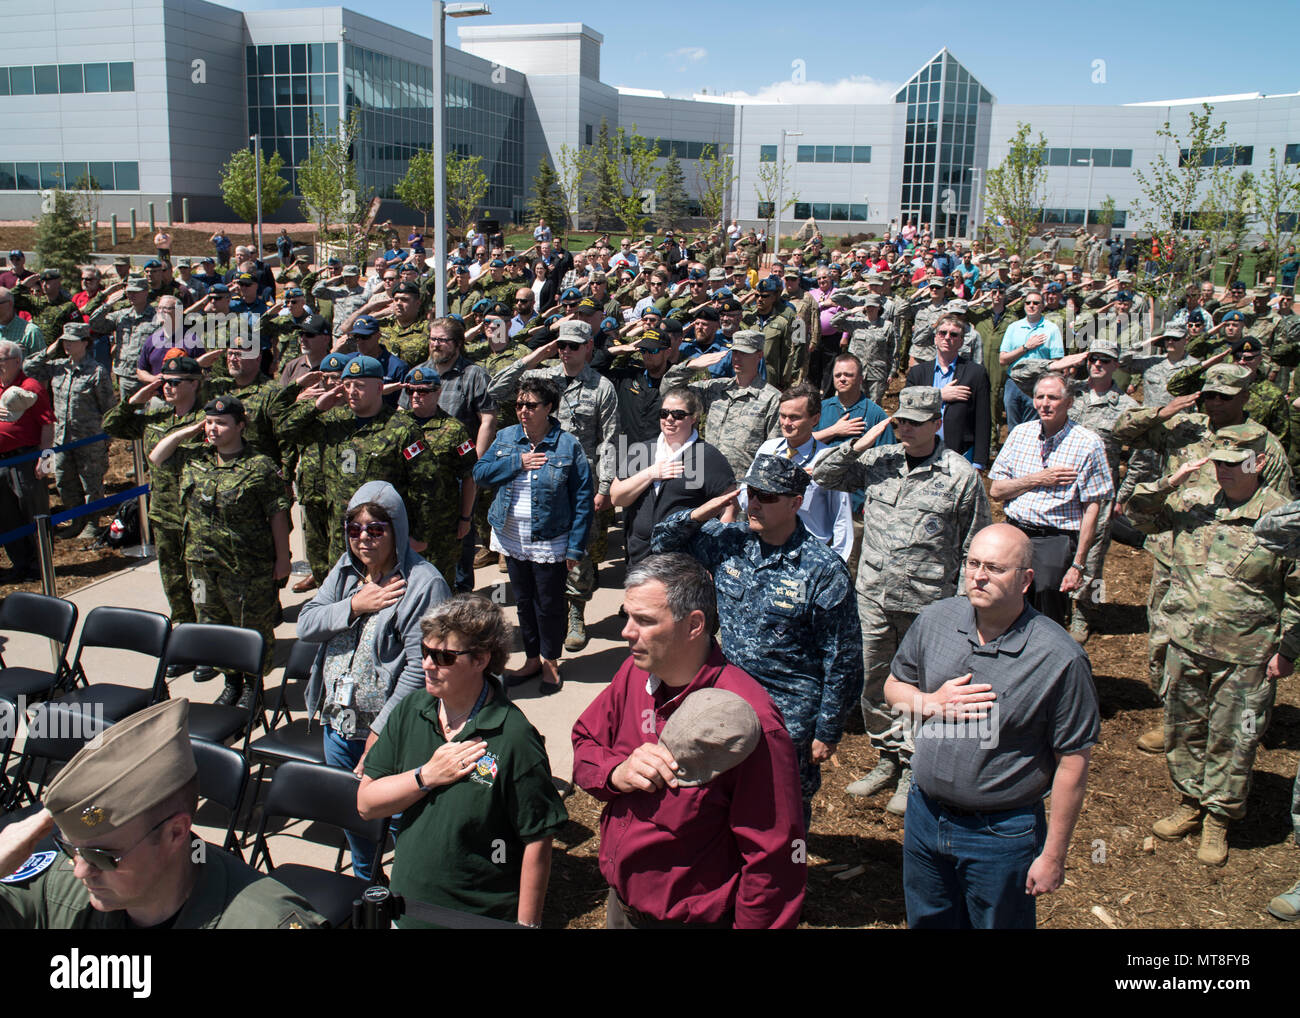 Members of the North American Aerospace Defense Command and U.S. Northern Command and invited guests salute during the singing of the Canadian and U.S. National Anthems during  the unveiling ceremony for a memorial cairn outside the NORAD and USNORTHCOM headquarters building on Peterson Air Force Base, Colorado, May 11. The cairn honors the Canadian service men and women who passed away while serving at NORAD in Colorado Springs. The placement and dedication of the cairn was conducted in conjunction with the 60th Anniversary of NORAD and the U.S. Canadian binational NORAD agreement. (DoD Photo Stock Photo